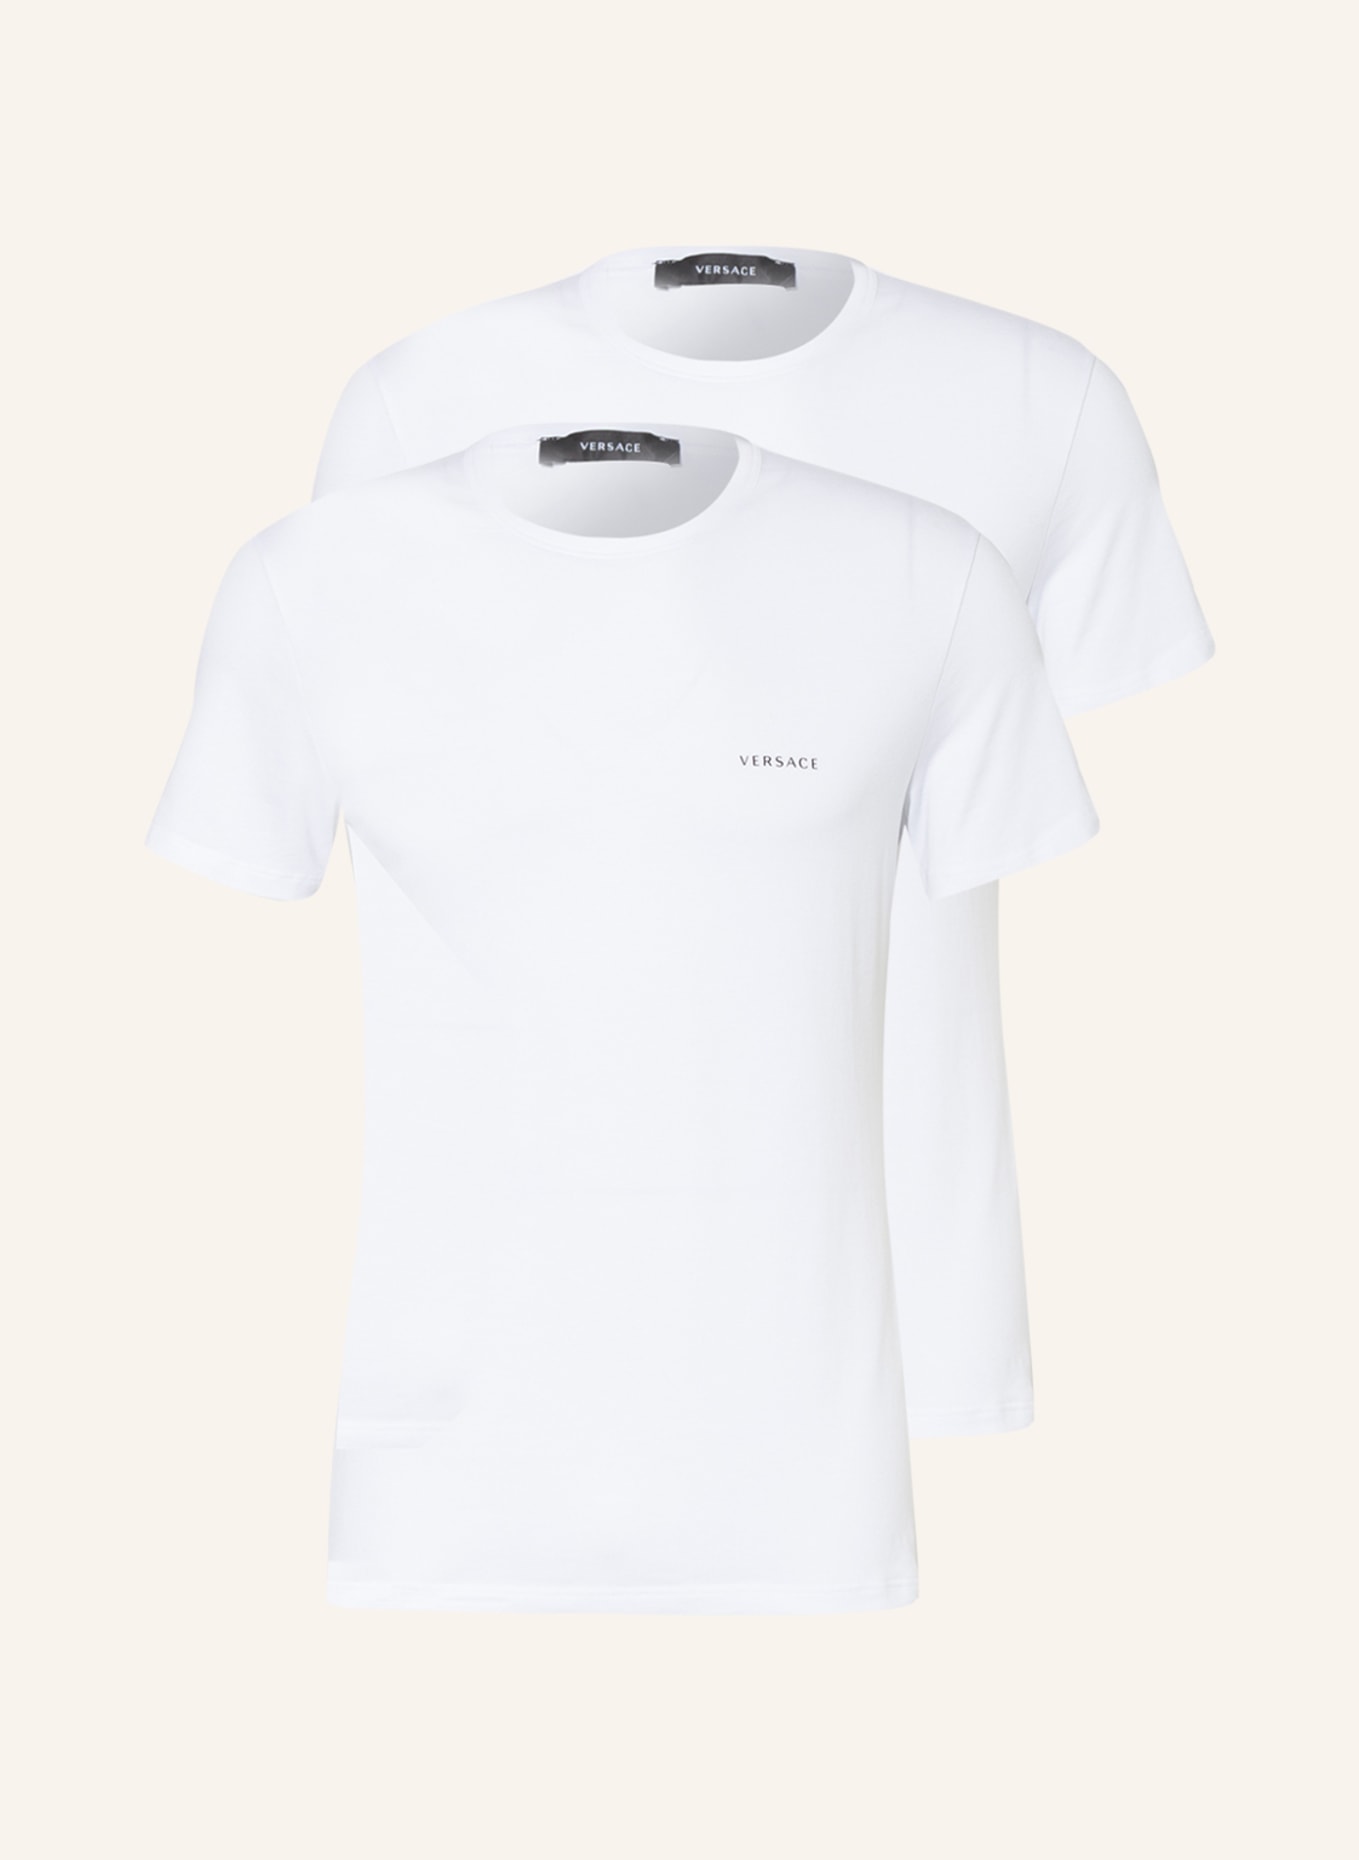 VERSACE 2-pack T-shirts, Color: WHITE (Image 1)